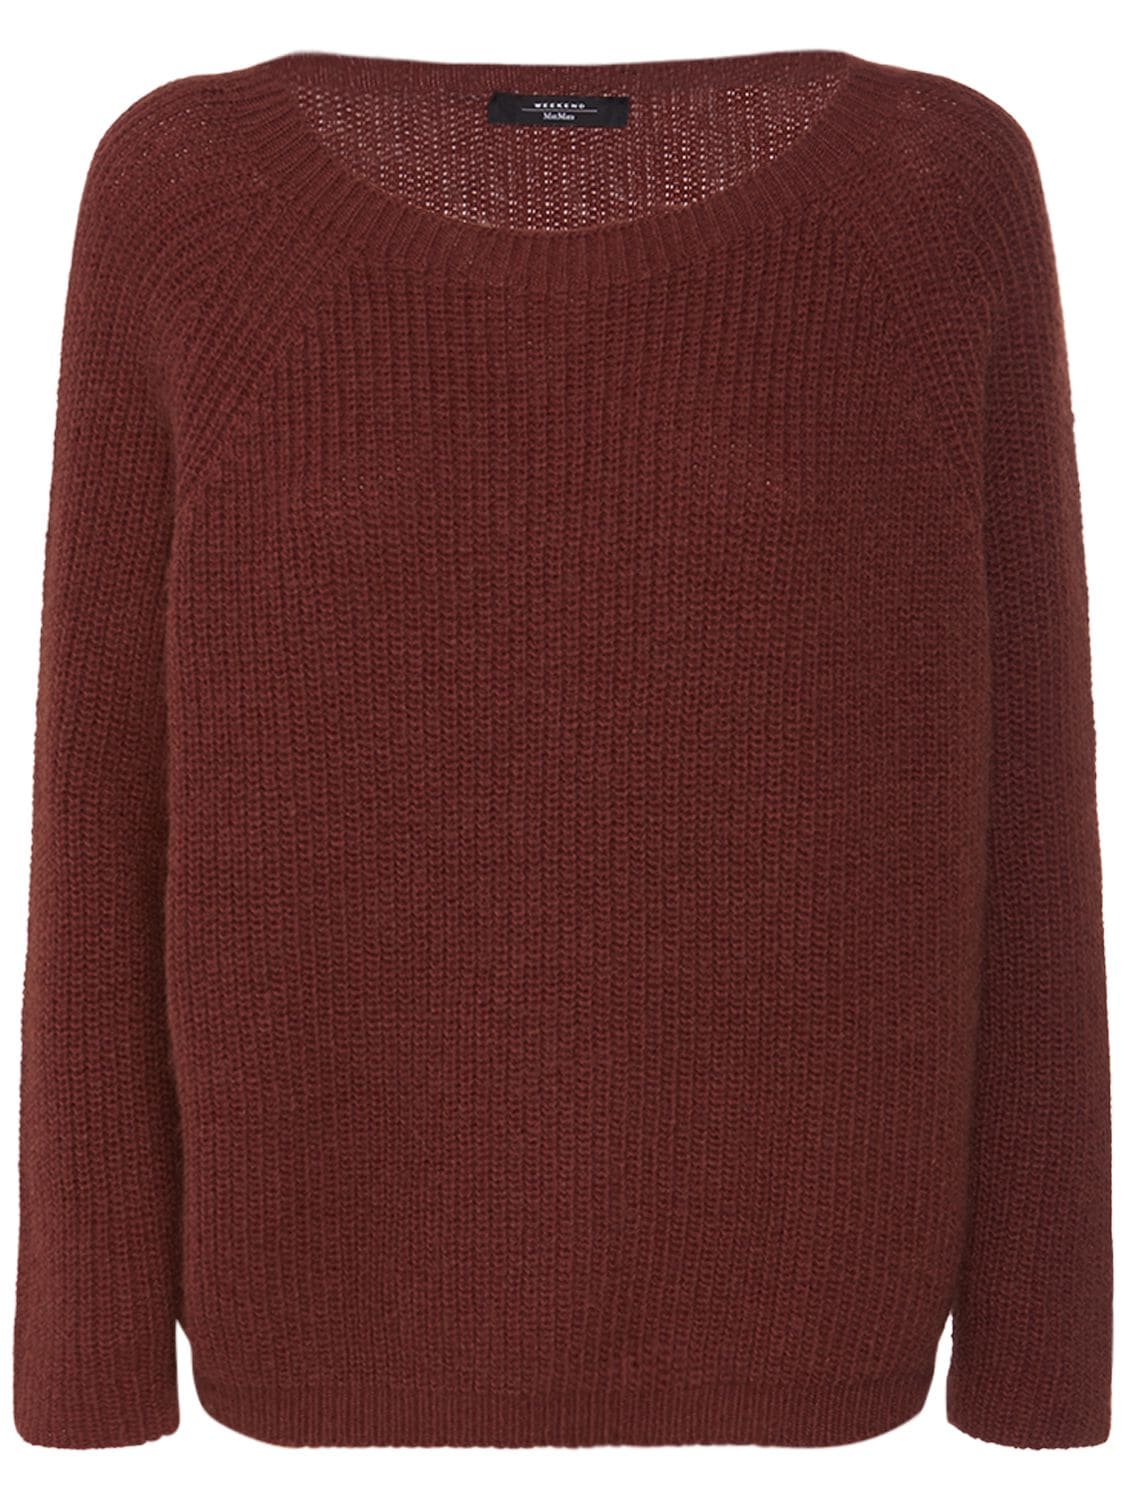 Weekend Max Mara Xeno Knit Mohair Blend Crewneck Sweater In Bordeaux